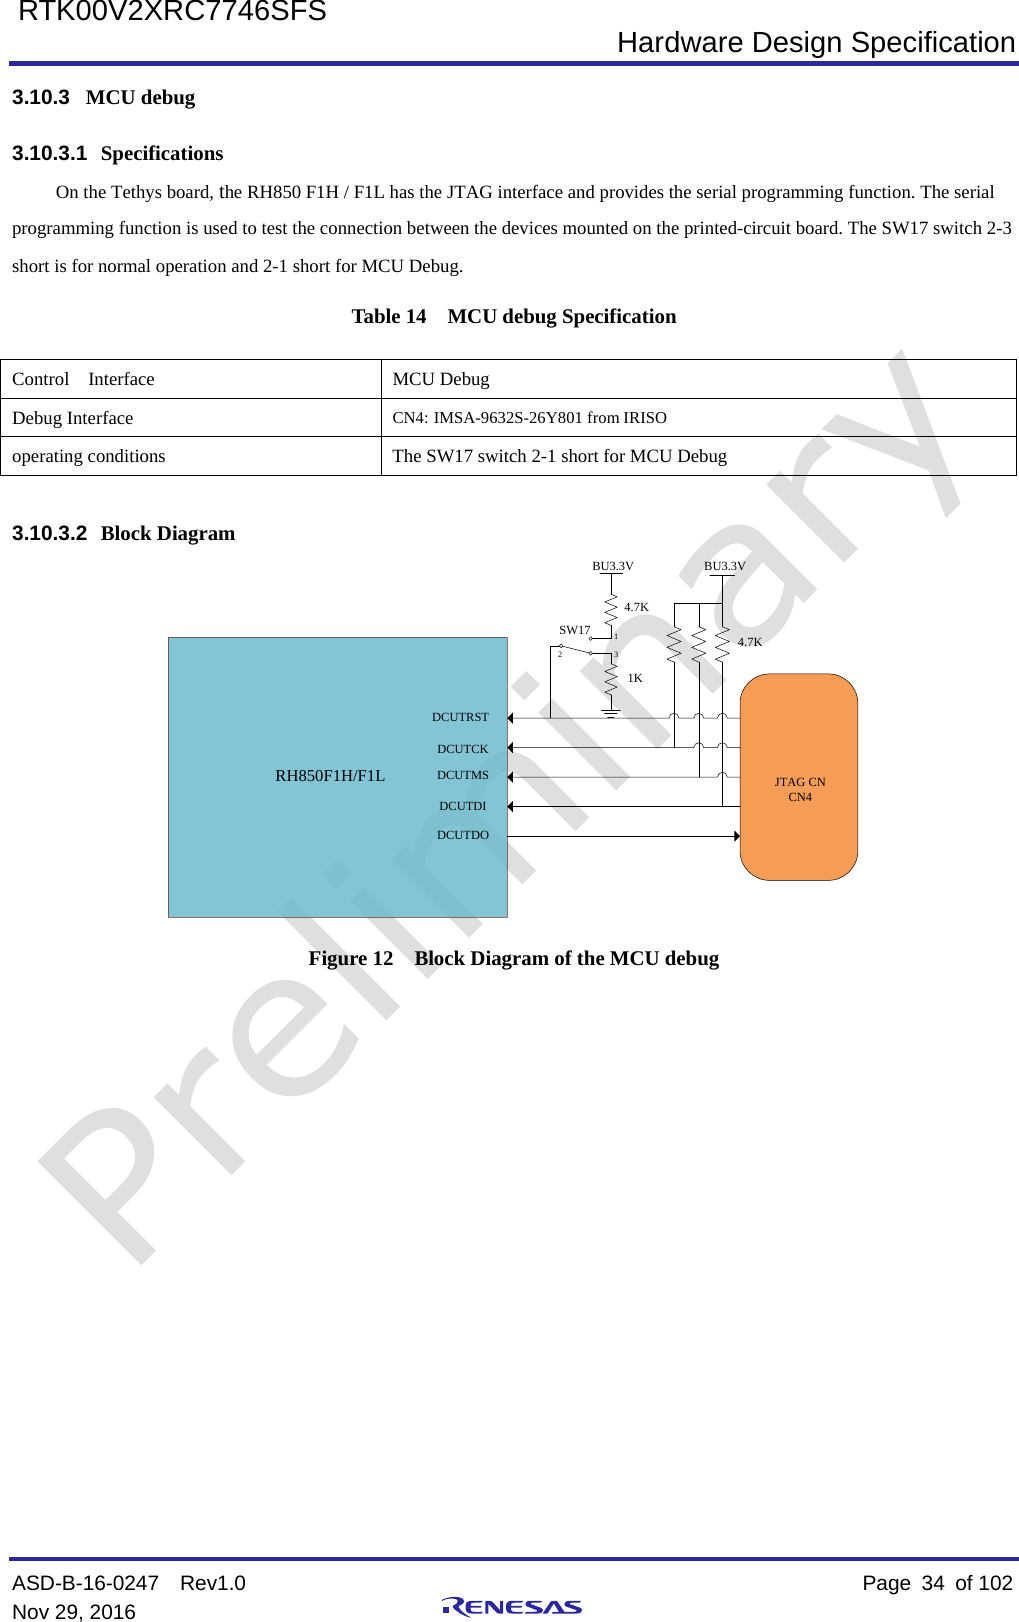  Hardware Design Specification ASD-B-16-0247  Rev1.0    Page  34 of 102 Nov 29, 2016     RTK00V2XRC7746SFS 3.10.3 MCU debug 3.10.3.1 Specifications On the Tethys board, the RH850 F1H / F1L has the JTAG interface and provides the serial programming function. The serial programming function is used to test the connection between the devices mounted on the printed-circuit board. The SW17 switch 2-3 short is for normal operation and 2-1 short for MCU Debug. Table 14  MCU debug Specification Control  Interface  MCU Debug Debug Interface CN4: IMSA-9632S-26Y801 from IRISO operating conditions The SW17 switch 2-1 short for MCU Debug  3.10.3.2 Block Diagram DCUTCKDCUTMS  DCUTRST BU3.3VDCUTDODCUTDI 4.7KRH850F1H/F1L JTAG CNCN4BU3.3V4.7K1KSW17312 Figure 12  Block Diagram of the MCU debug               